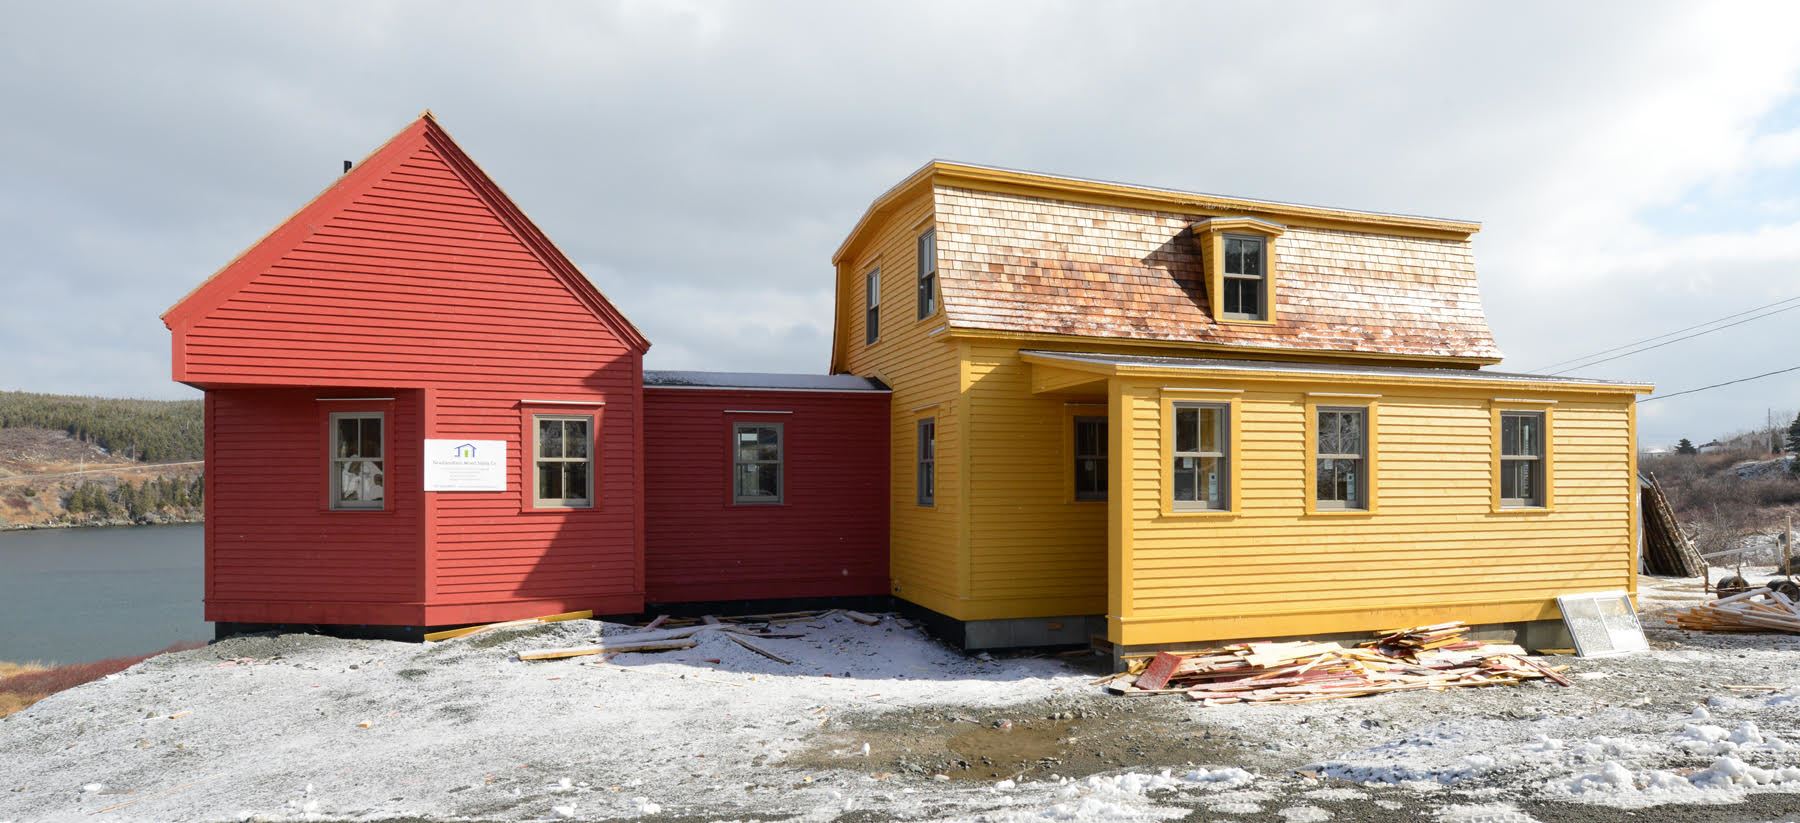 Restoration of the Keough Homestead in Calvert, Newfoundland a new addition for a studiobedroom was added to the east side of the house, painted with the red ochre colour typically used for outbuildings. Photo courtesy of Robert Mellin